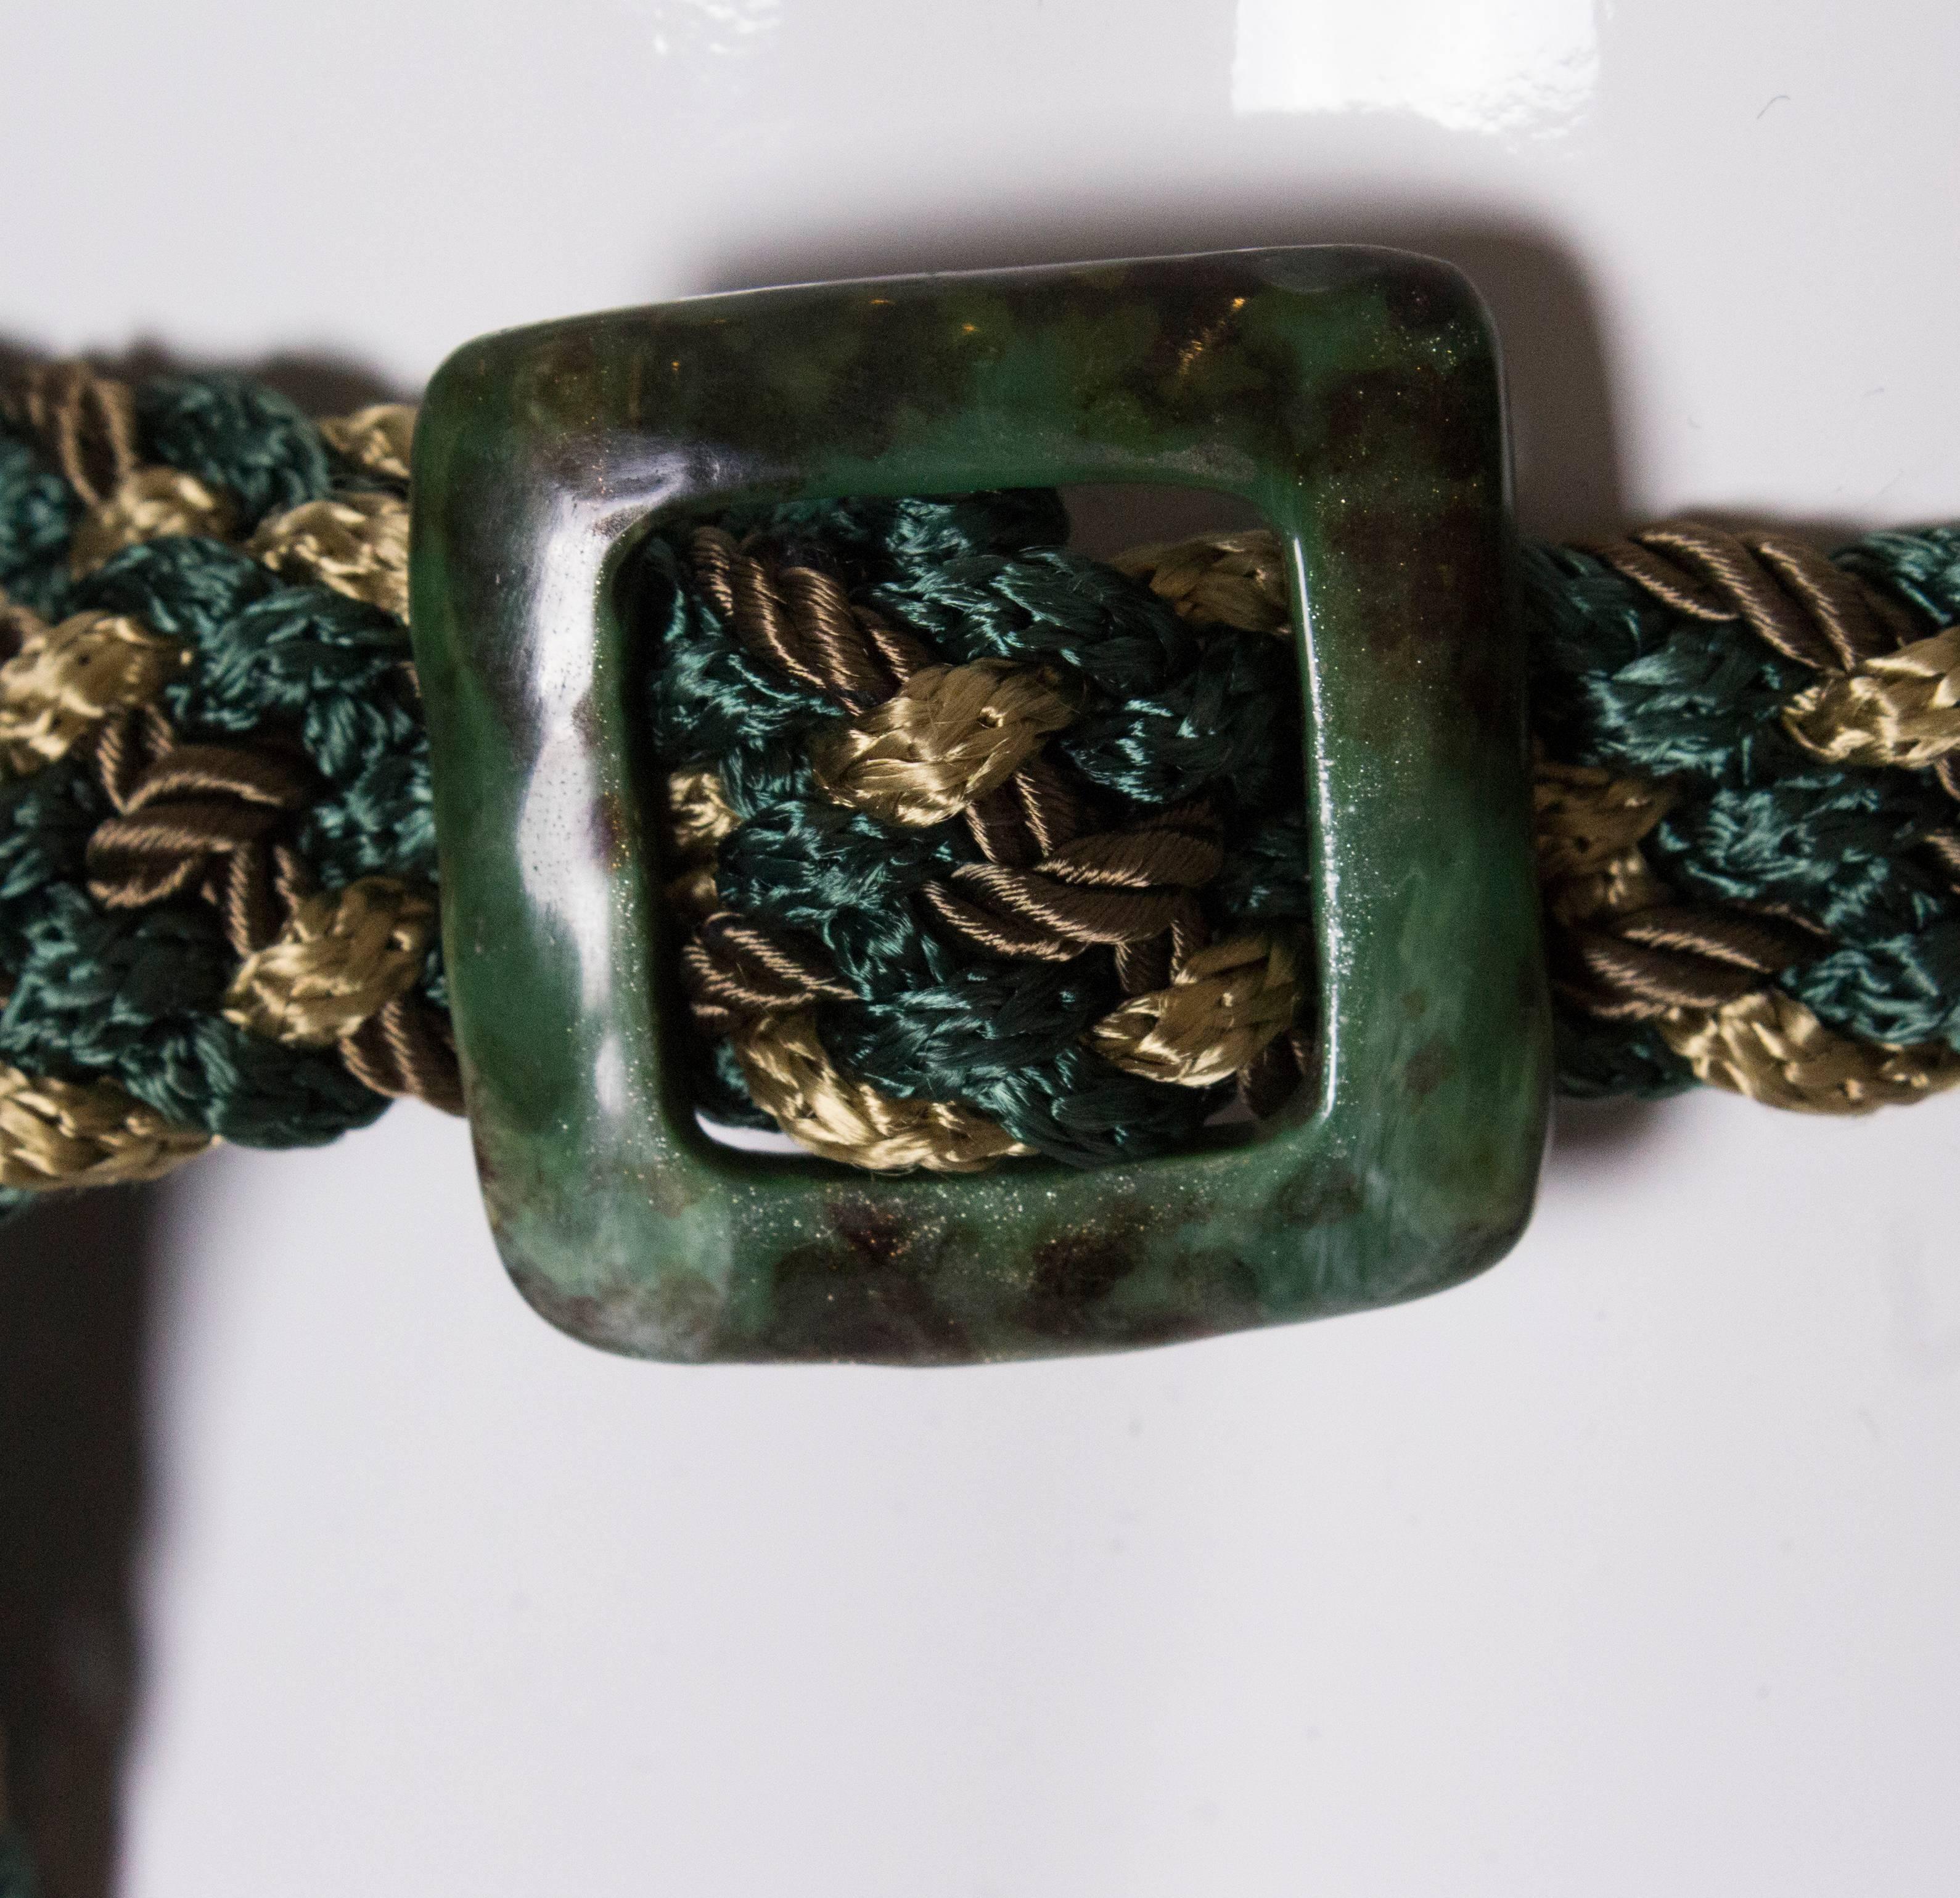 A great belt by Yves Saint Laurent. The belt is made of silk cord in green, gold and bronze with a green marble like buckle. The belt has no holes , so can work around you. It has a YSL gold tag.